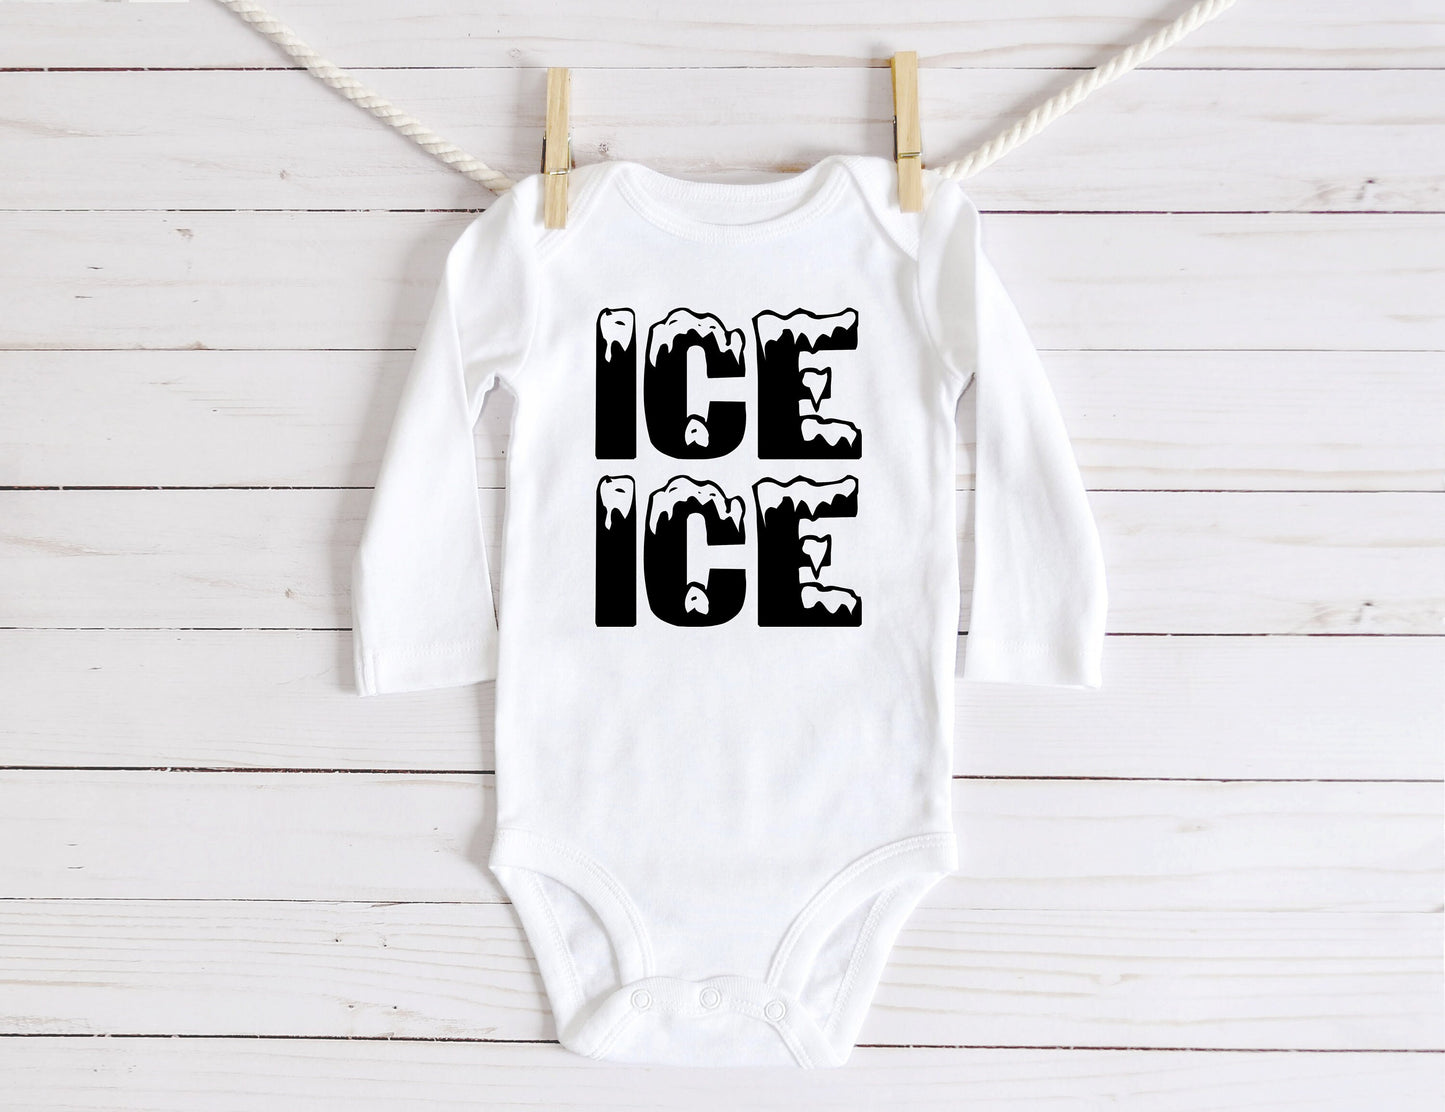 Ice Ice Infant Bodysuit - ice ice baby - ivf baby bodysuit - funny baby outfit - ivf baby gift - frozen embryo baby gift - baby shower gift